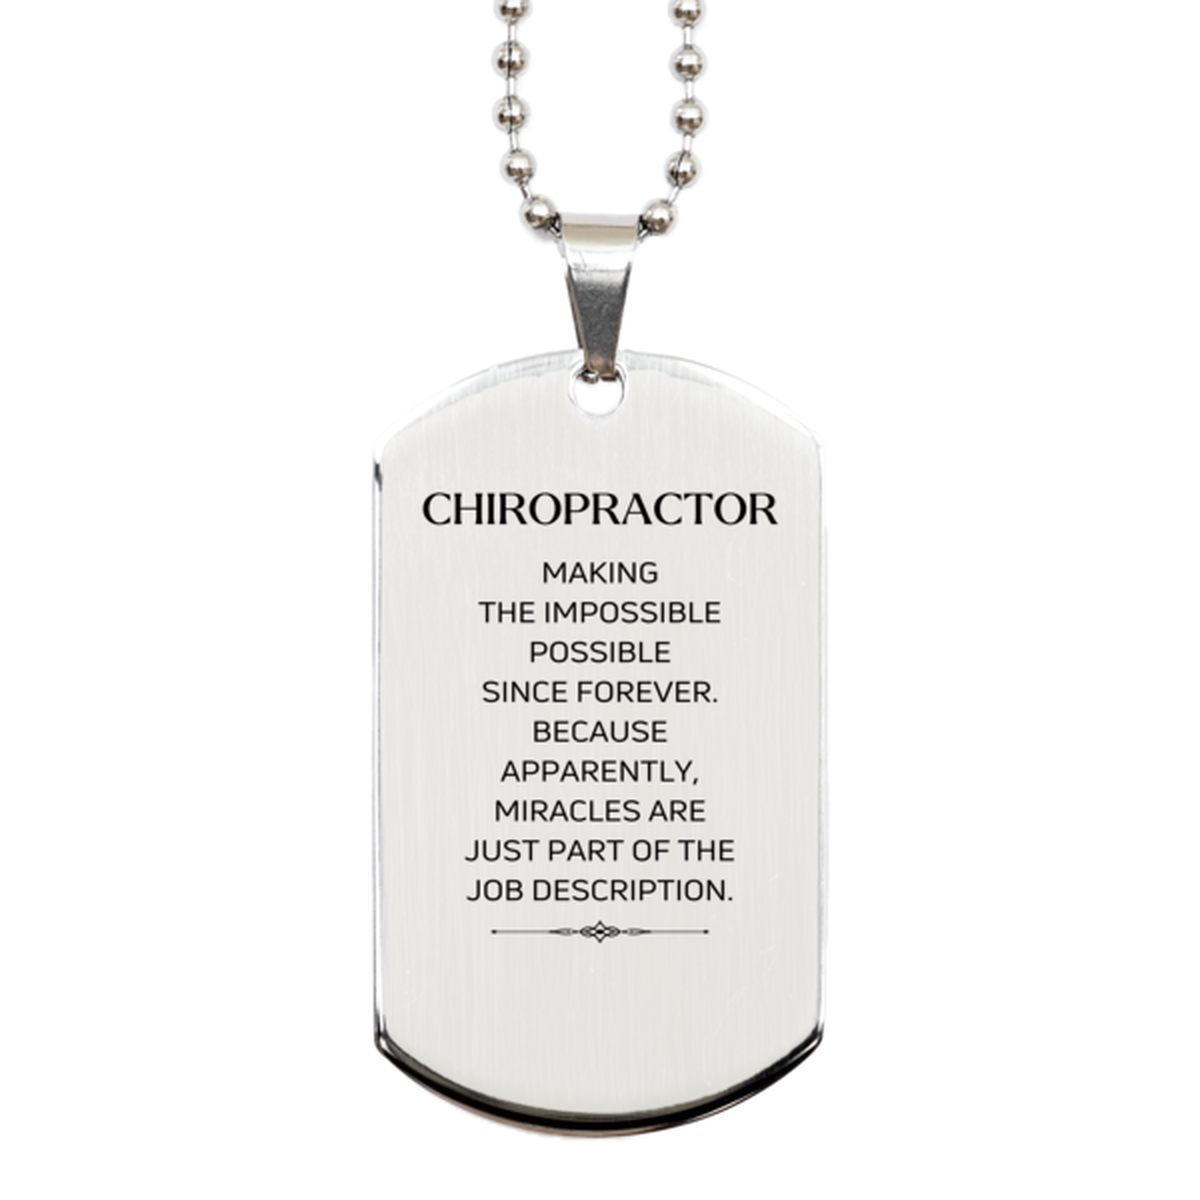 Funny Chiropractor Gifts, Miracles are just part of the job description, Inspirational Birthday Silver Dog Tag For Chiropractor, Men, Women, Coworkers, Friends, Boss